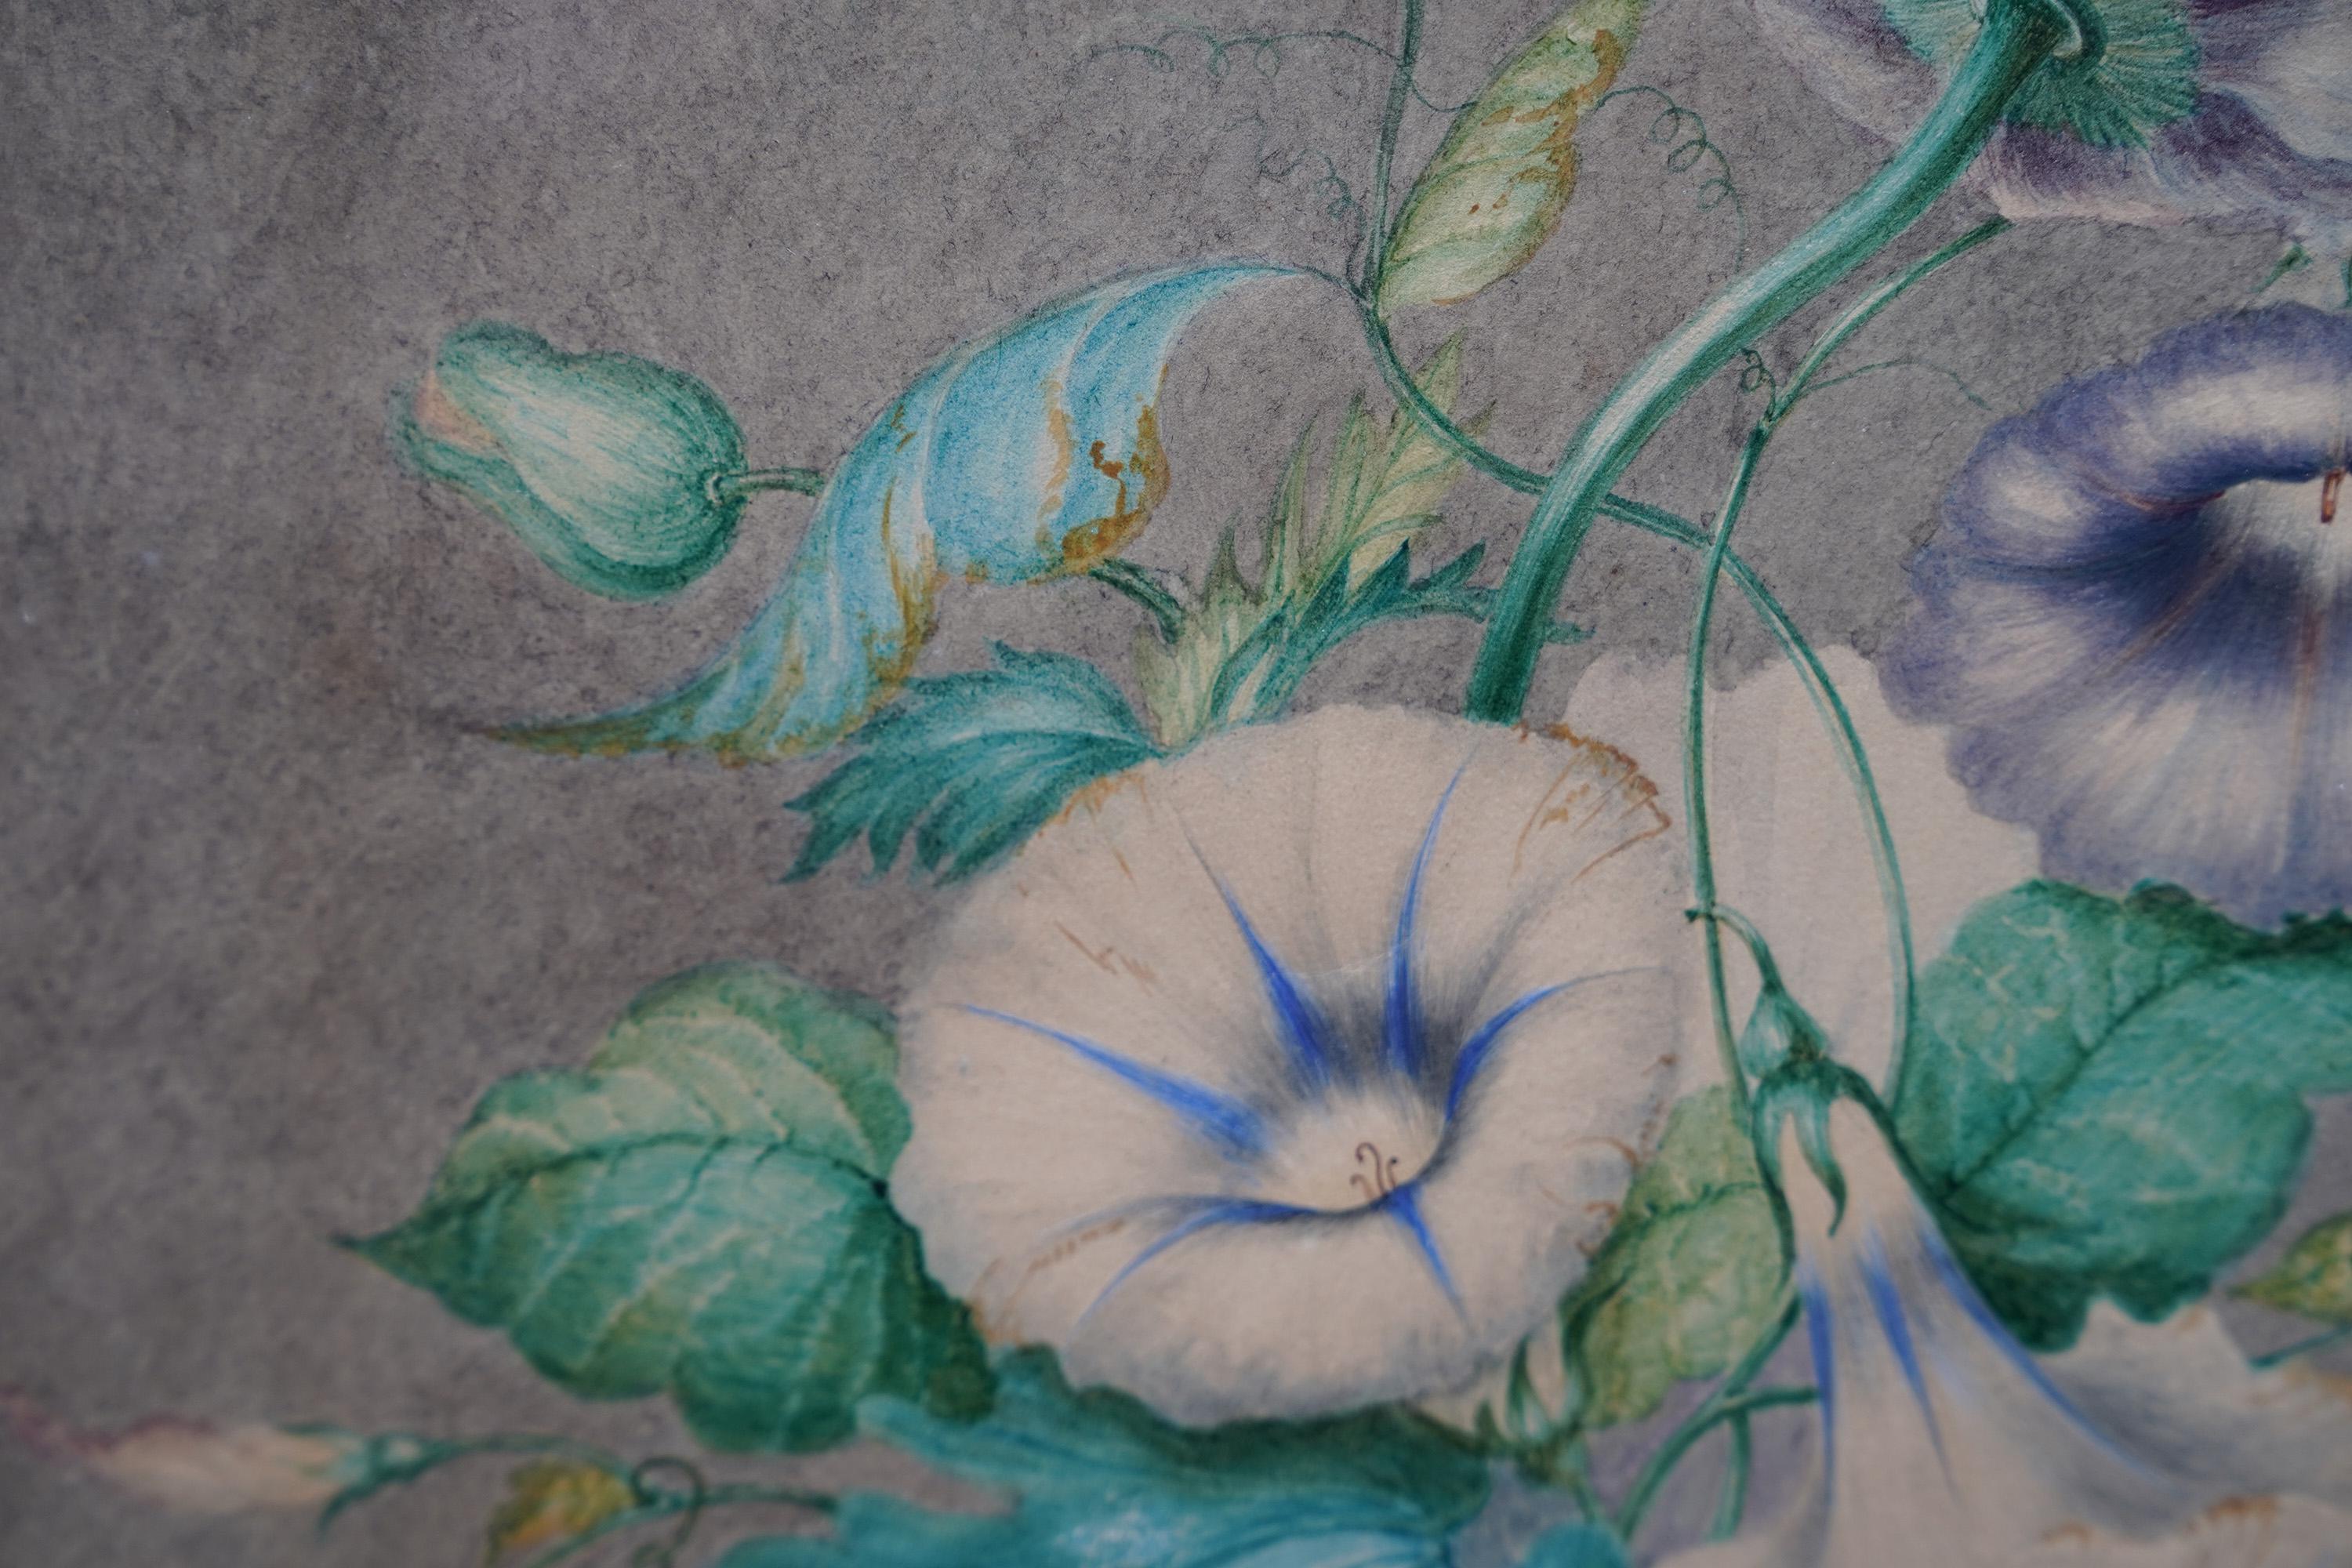 This charming Old Master circa 1800 water colour painting is of morning glory flowers and tendrils entwined with a poppy. The foliage has a metallic green tone and the white morning glory is tinged with blue. The artist is suggesting the passing of